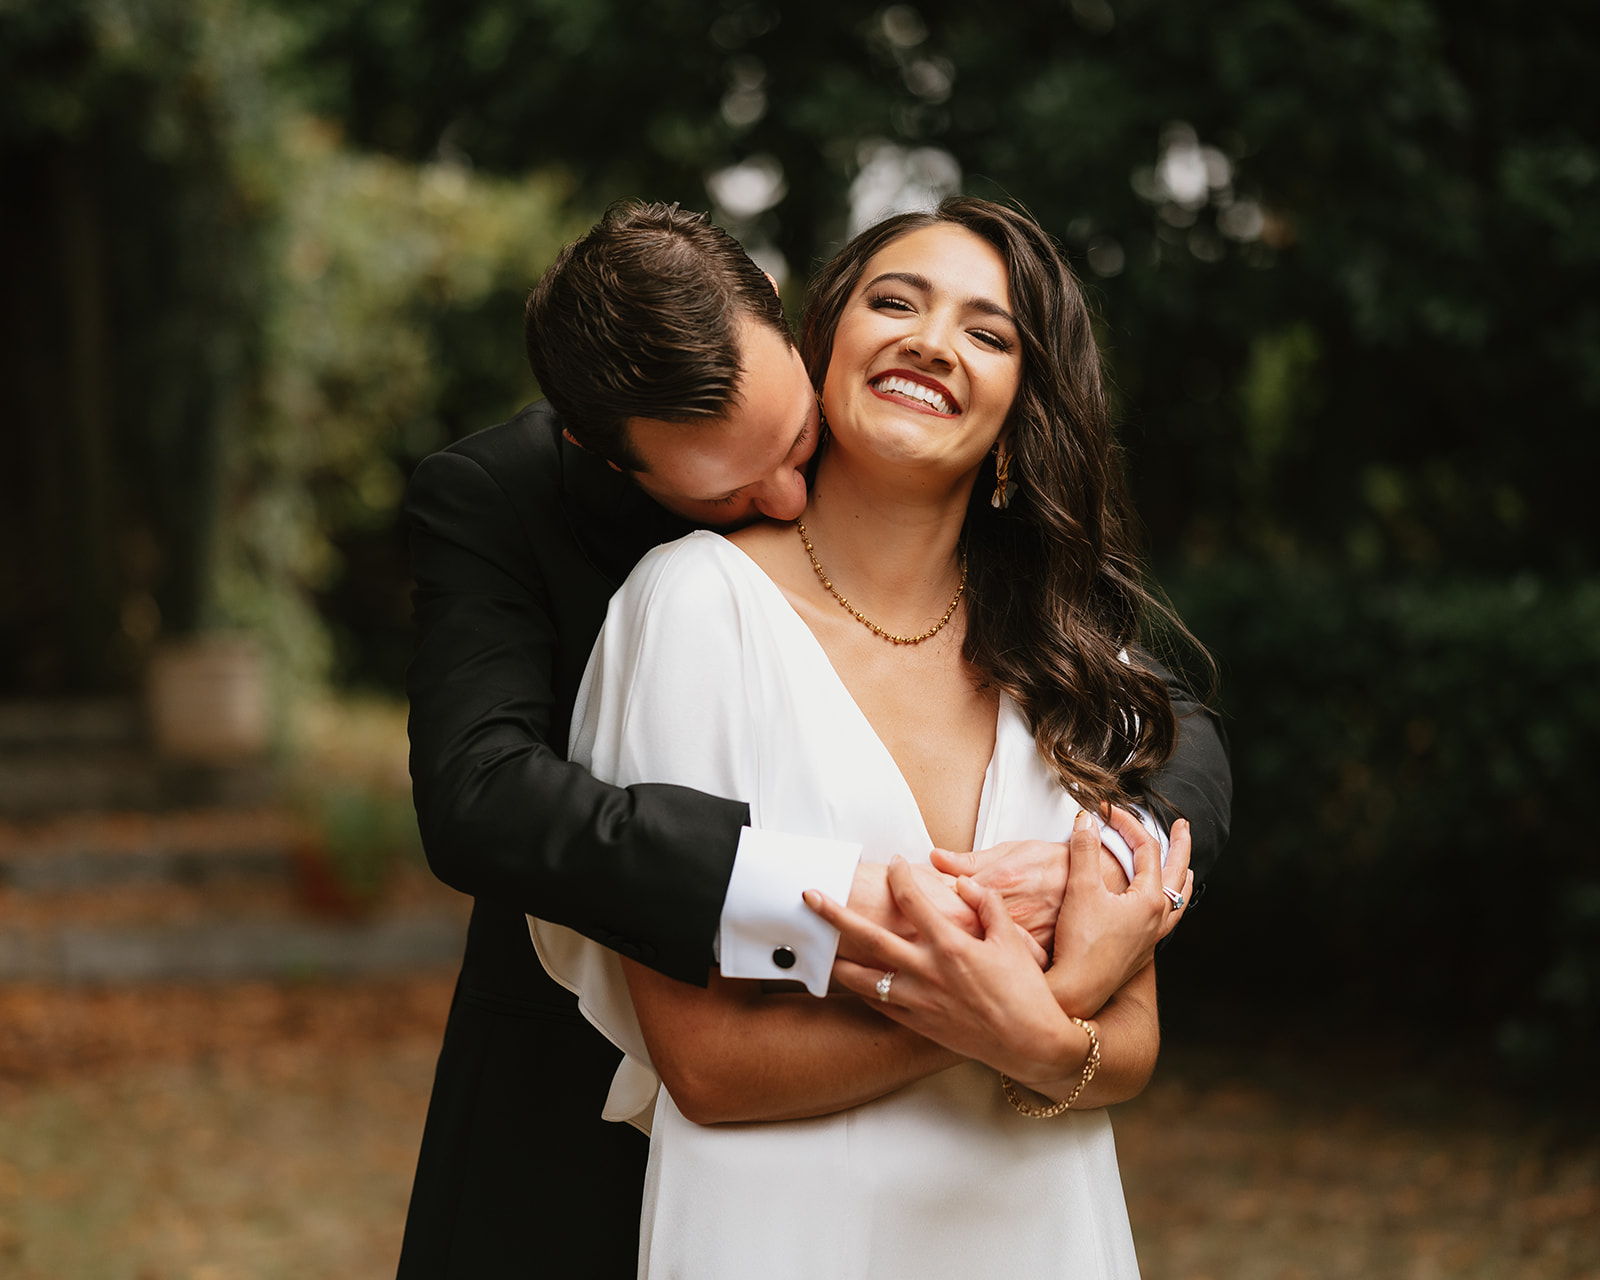 Groom kisses his Bride from behind and gives her a hug